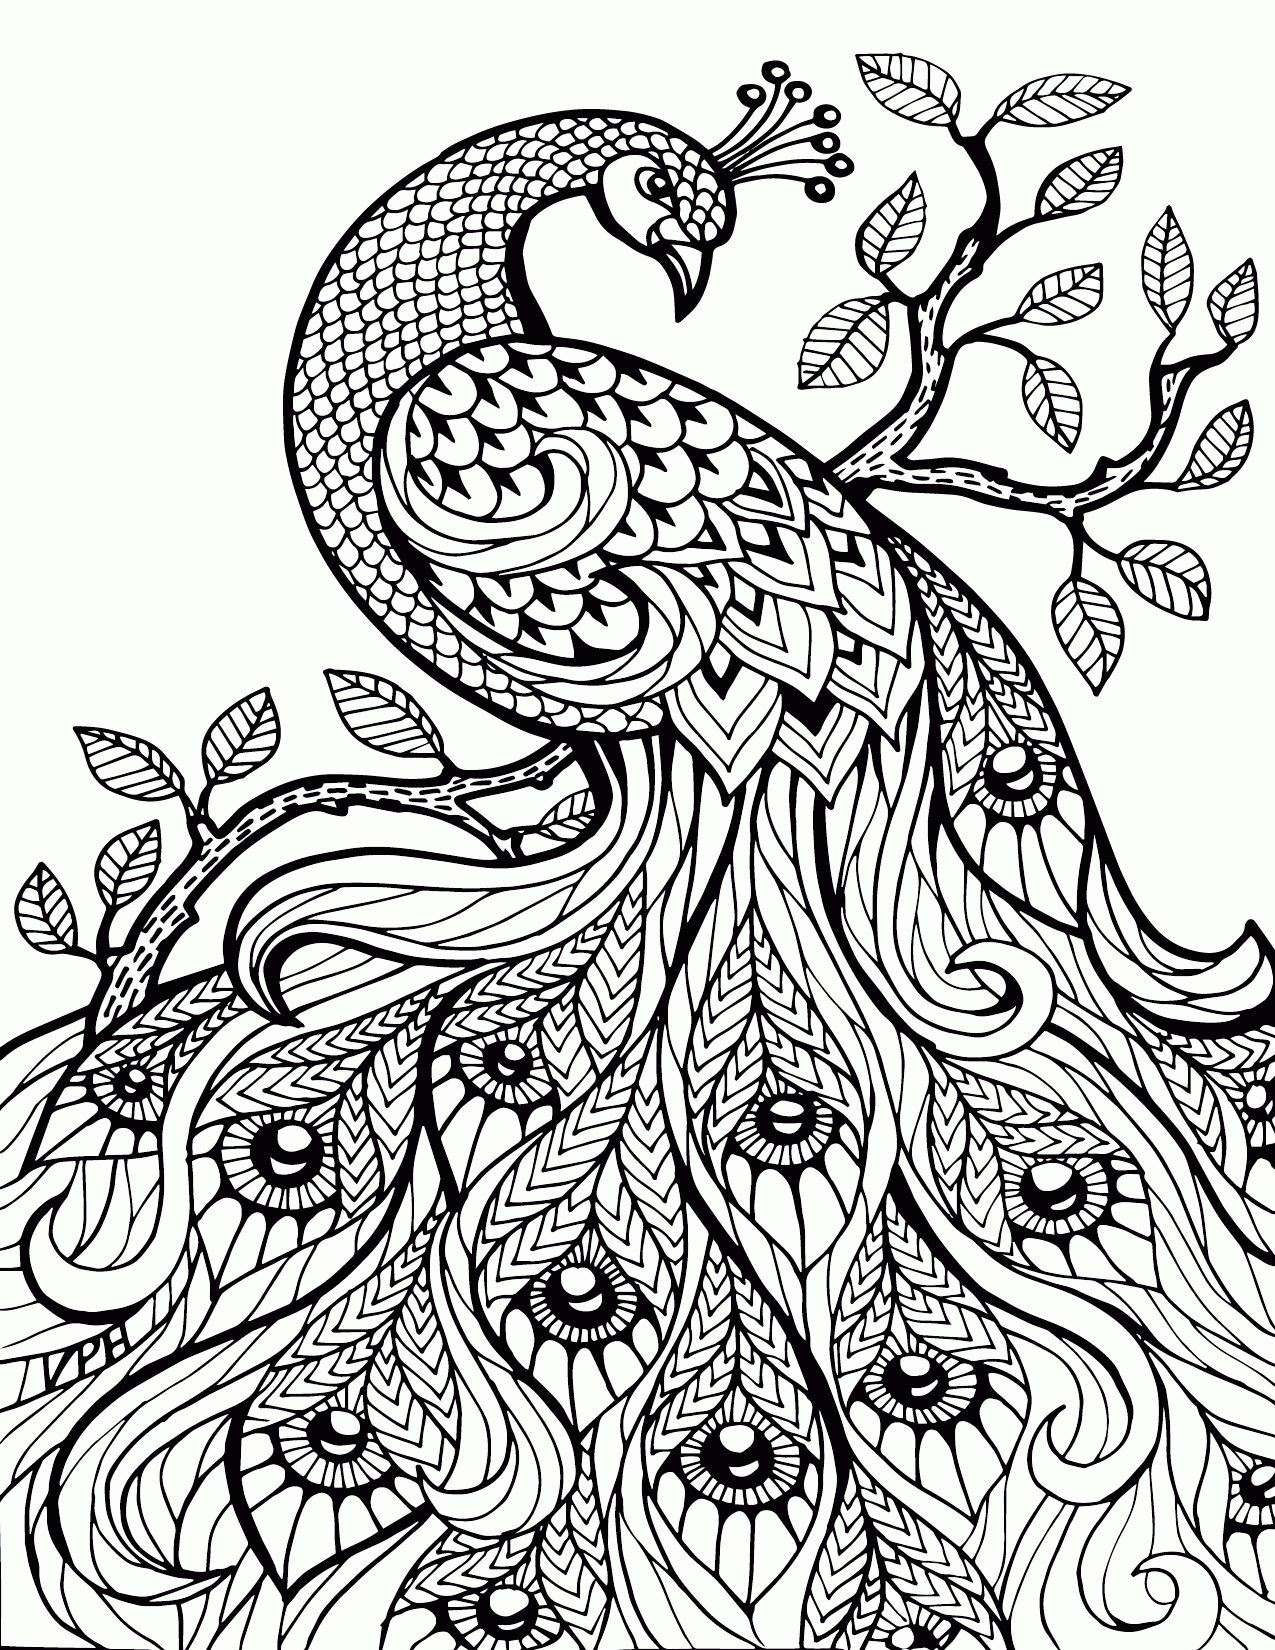 Adult Animals Coloring Pages   Coloring Home